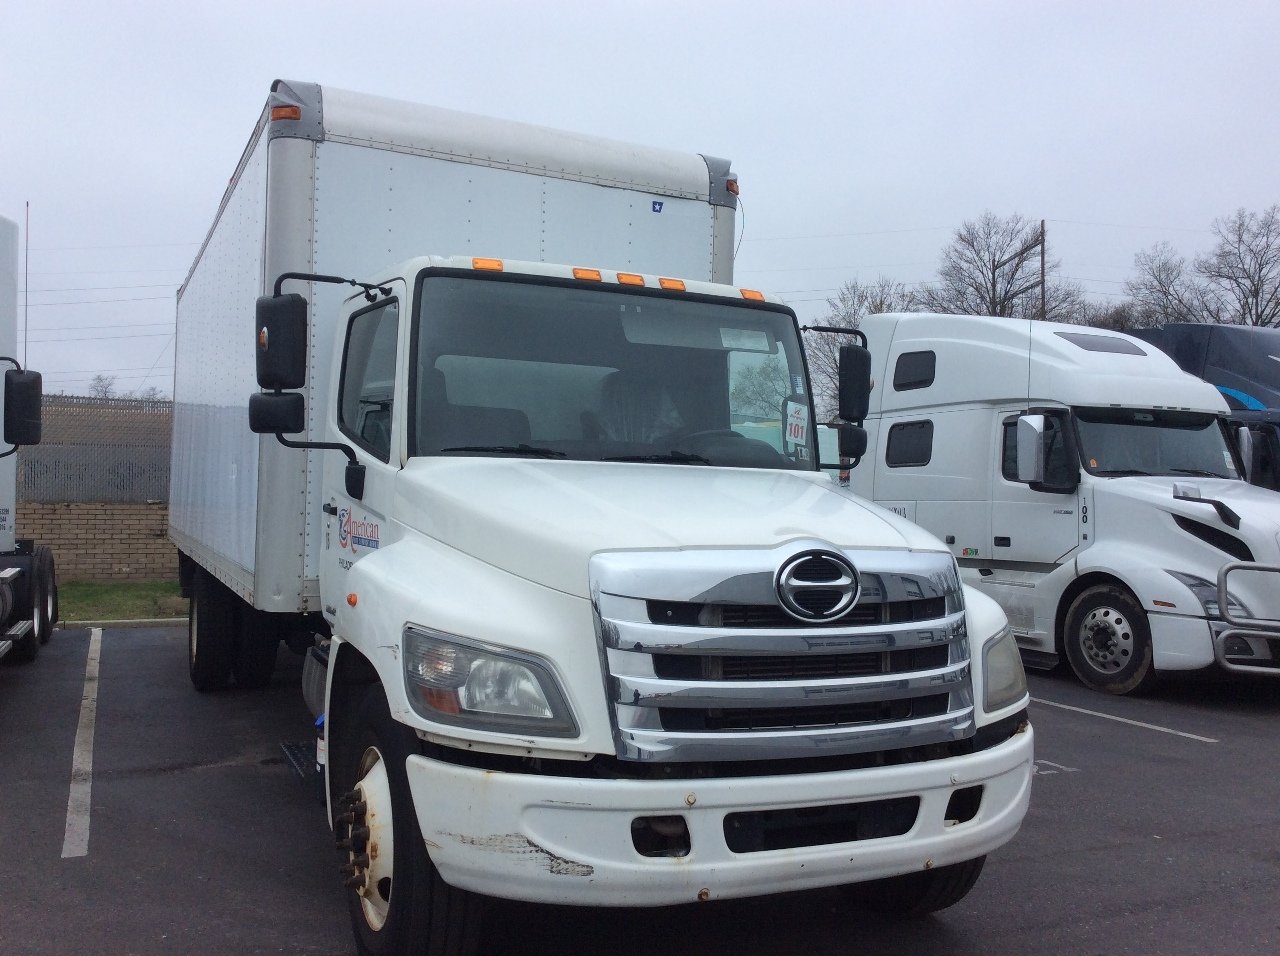 Used Truck Inventory - 1001821 02 2 - 47